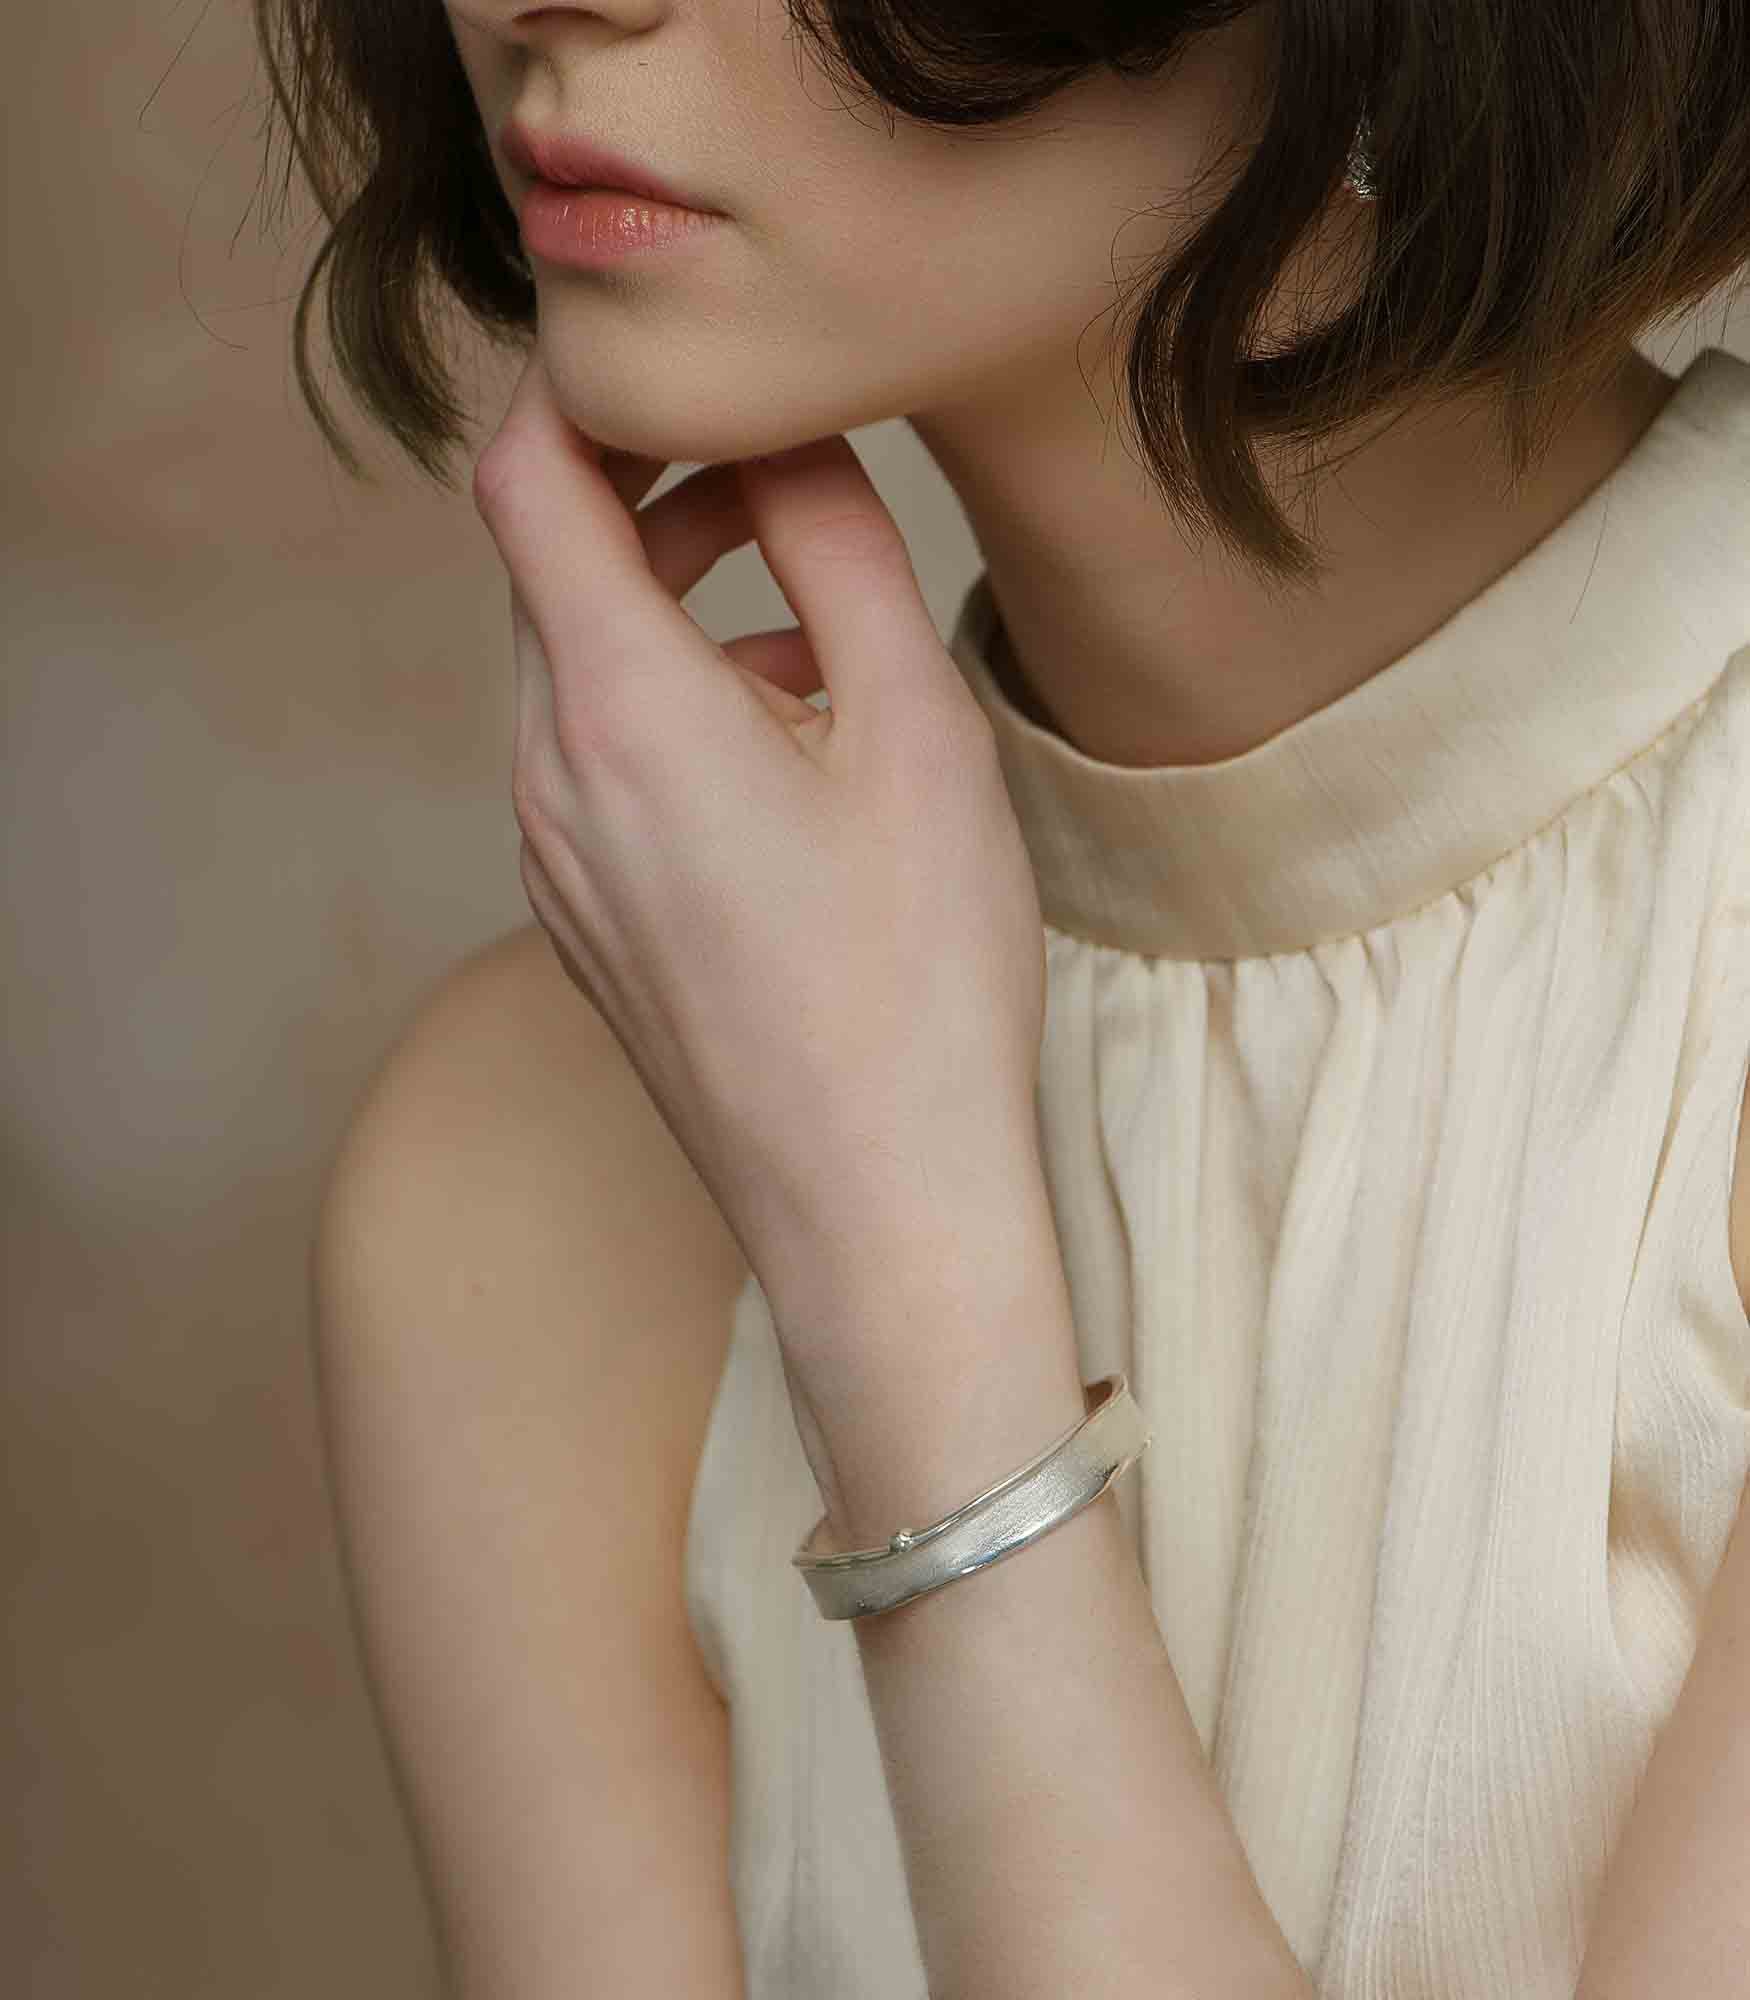 A model wearing a sterling silver bangle bracelet with a simple design featuring a brushstroke texture.